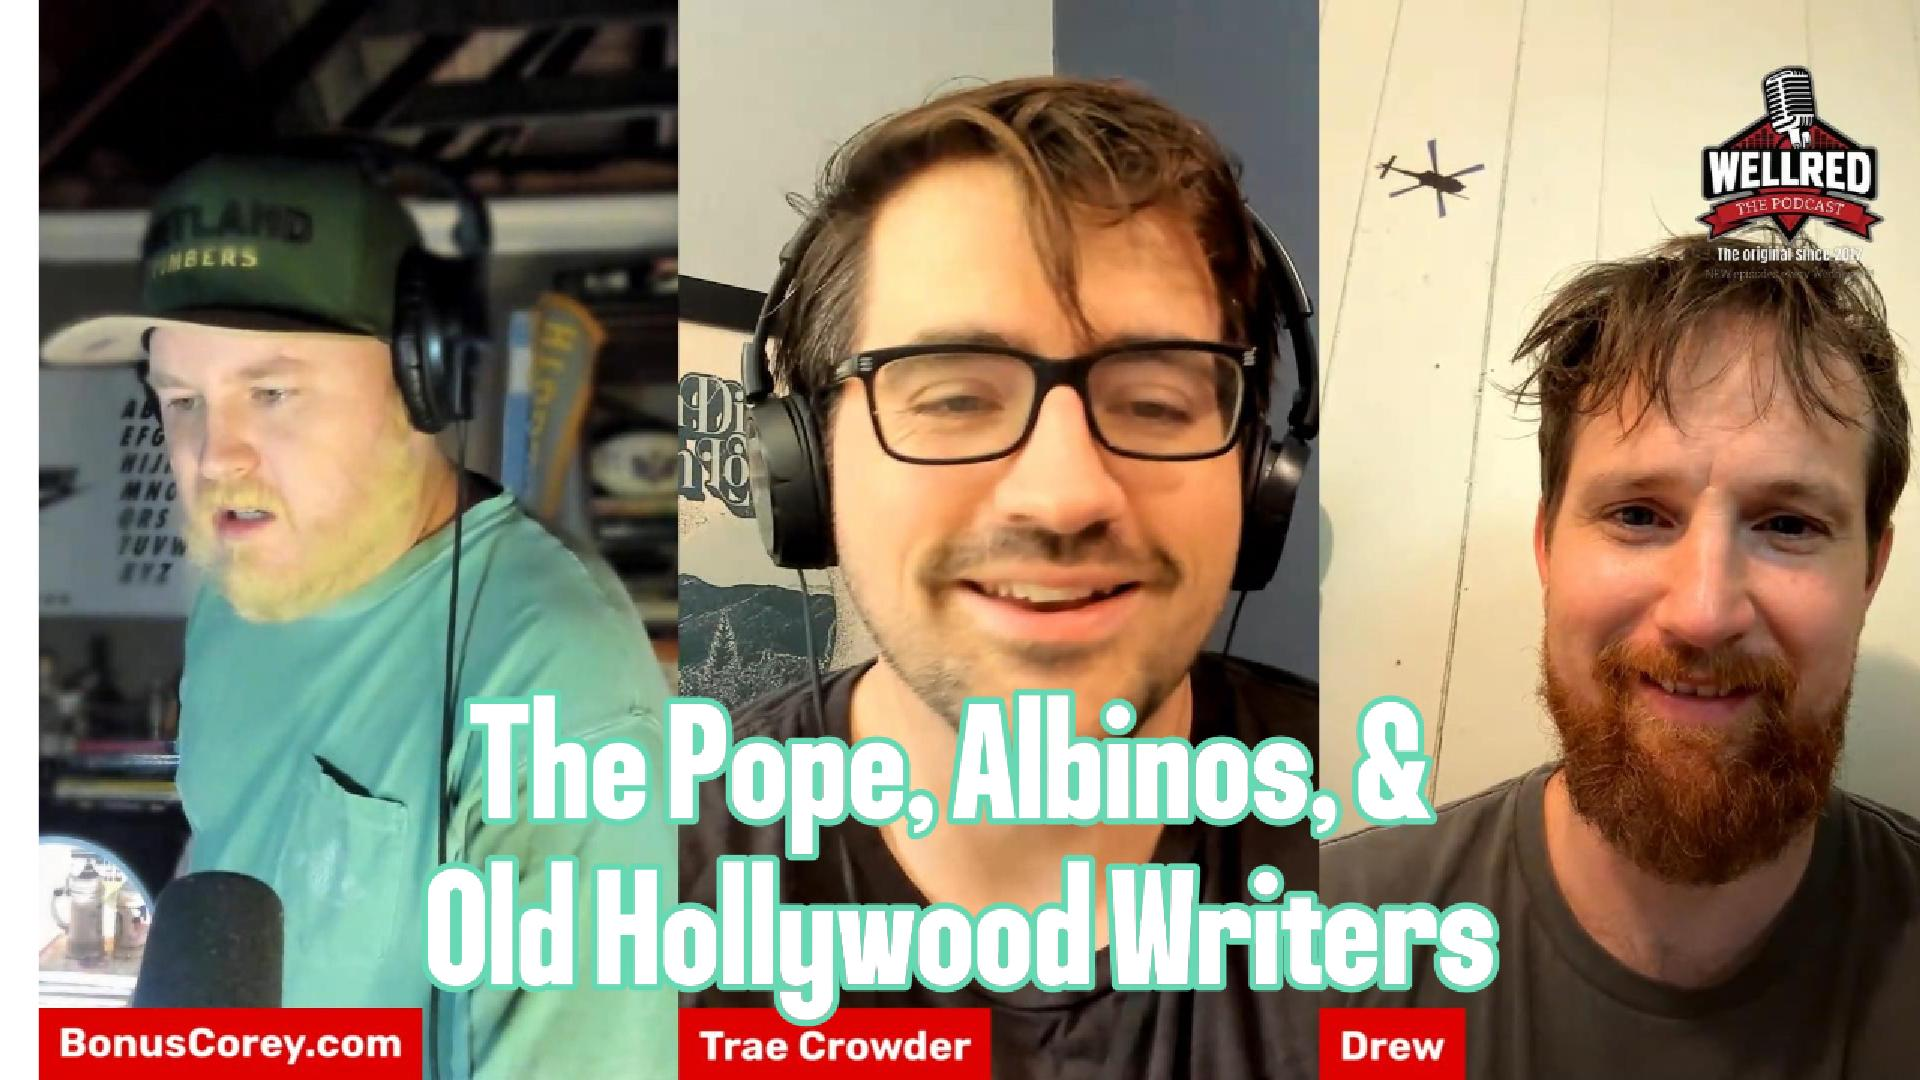 #391 - The Pope, Albinos, & Old Hollywood Writers!